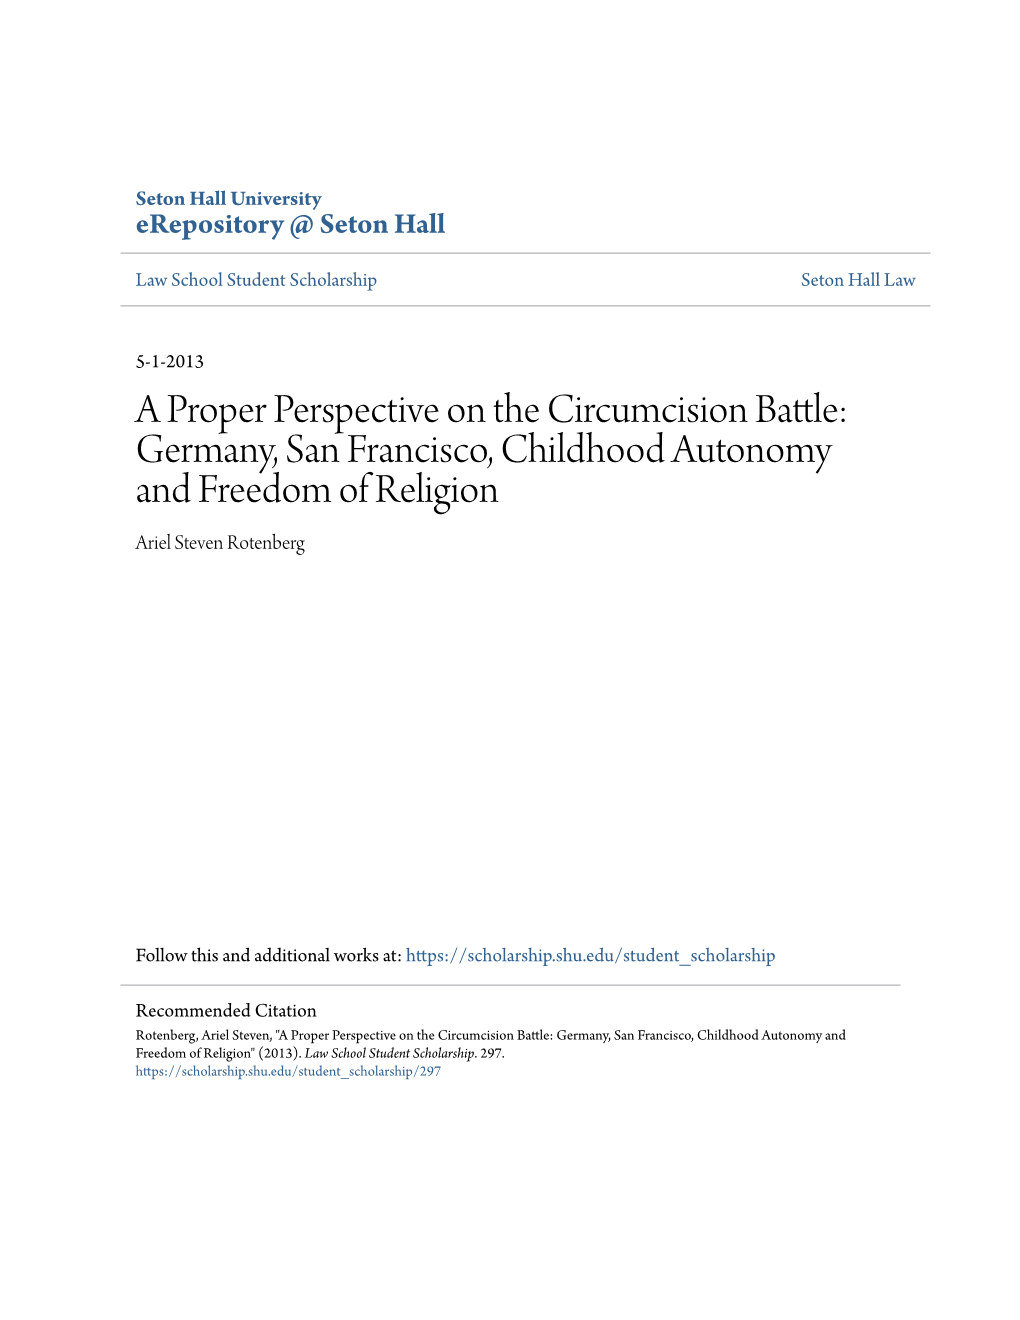 A Proper Perspective on the Circumcision Battle: Germany, San Francisco, Childhood Autonomy and Freedom of Religion Ariel Steven Rotenberg